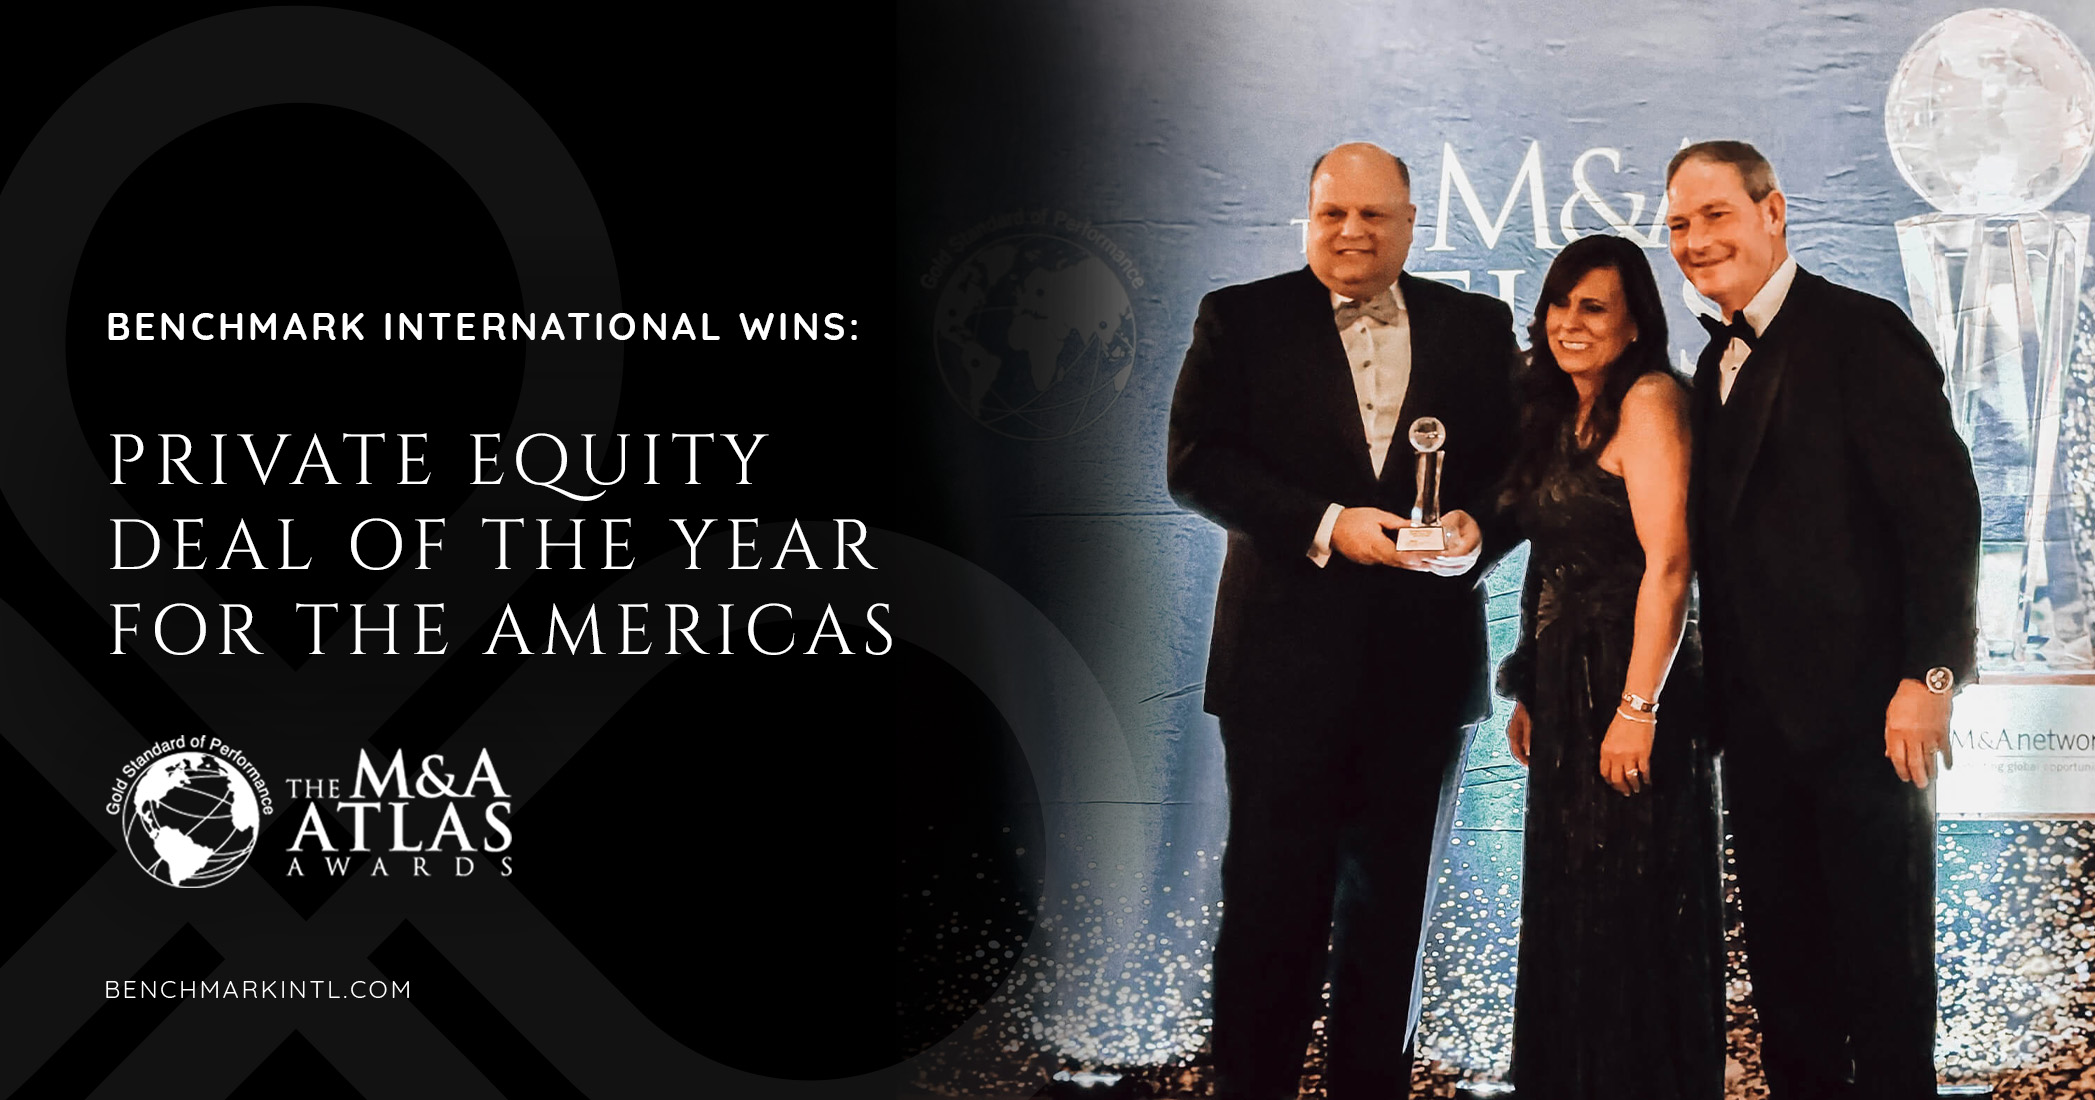 Benchmark International’s Transaction of KGM Wins Private Equity Deal Of The Year For The Americas